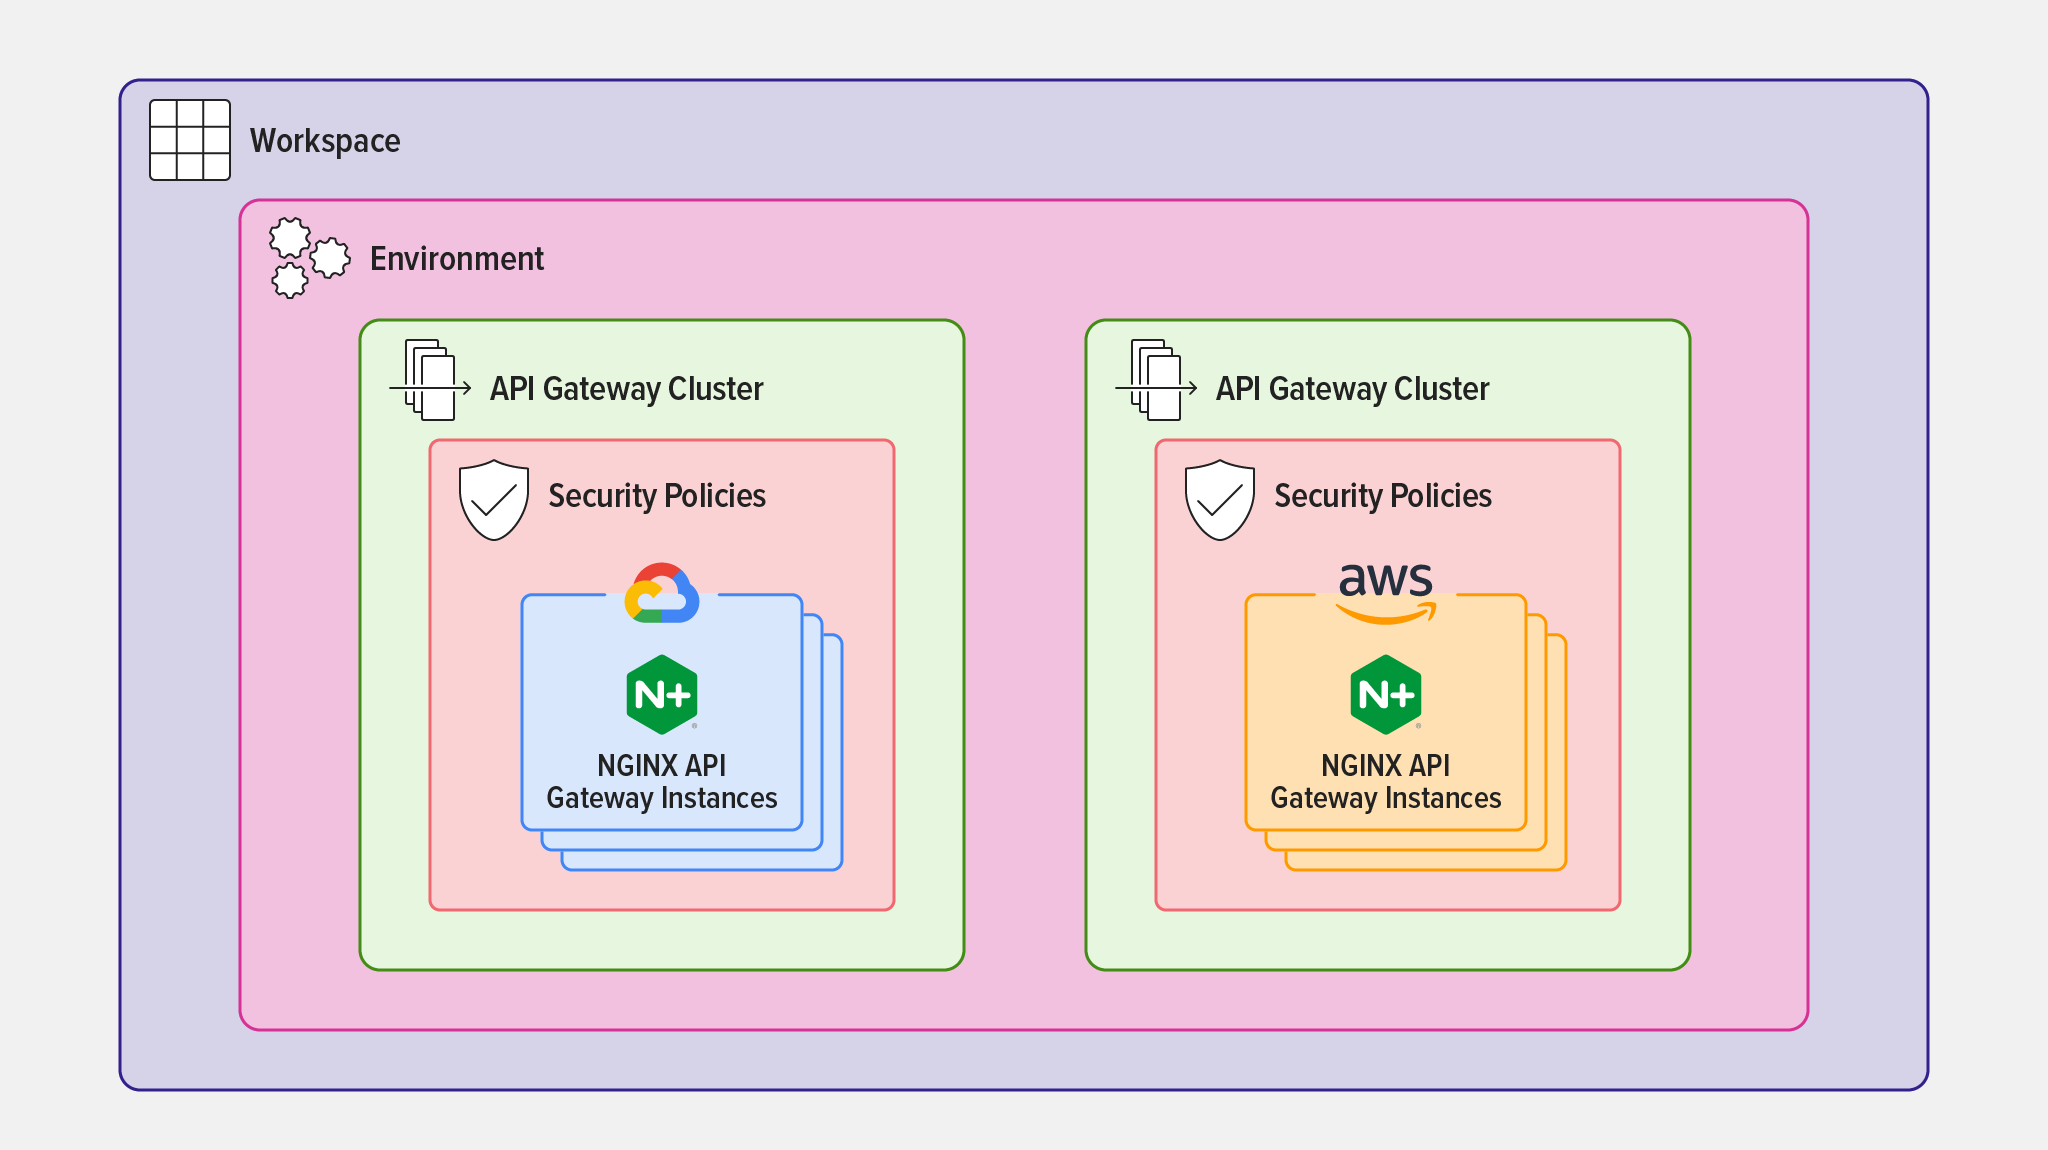 Diagram showing how different security policies can apply to API gateways deployed in separate API Gateway Clusters in API Connectivity Manager